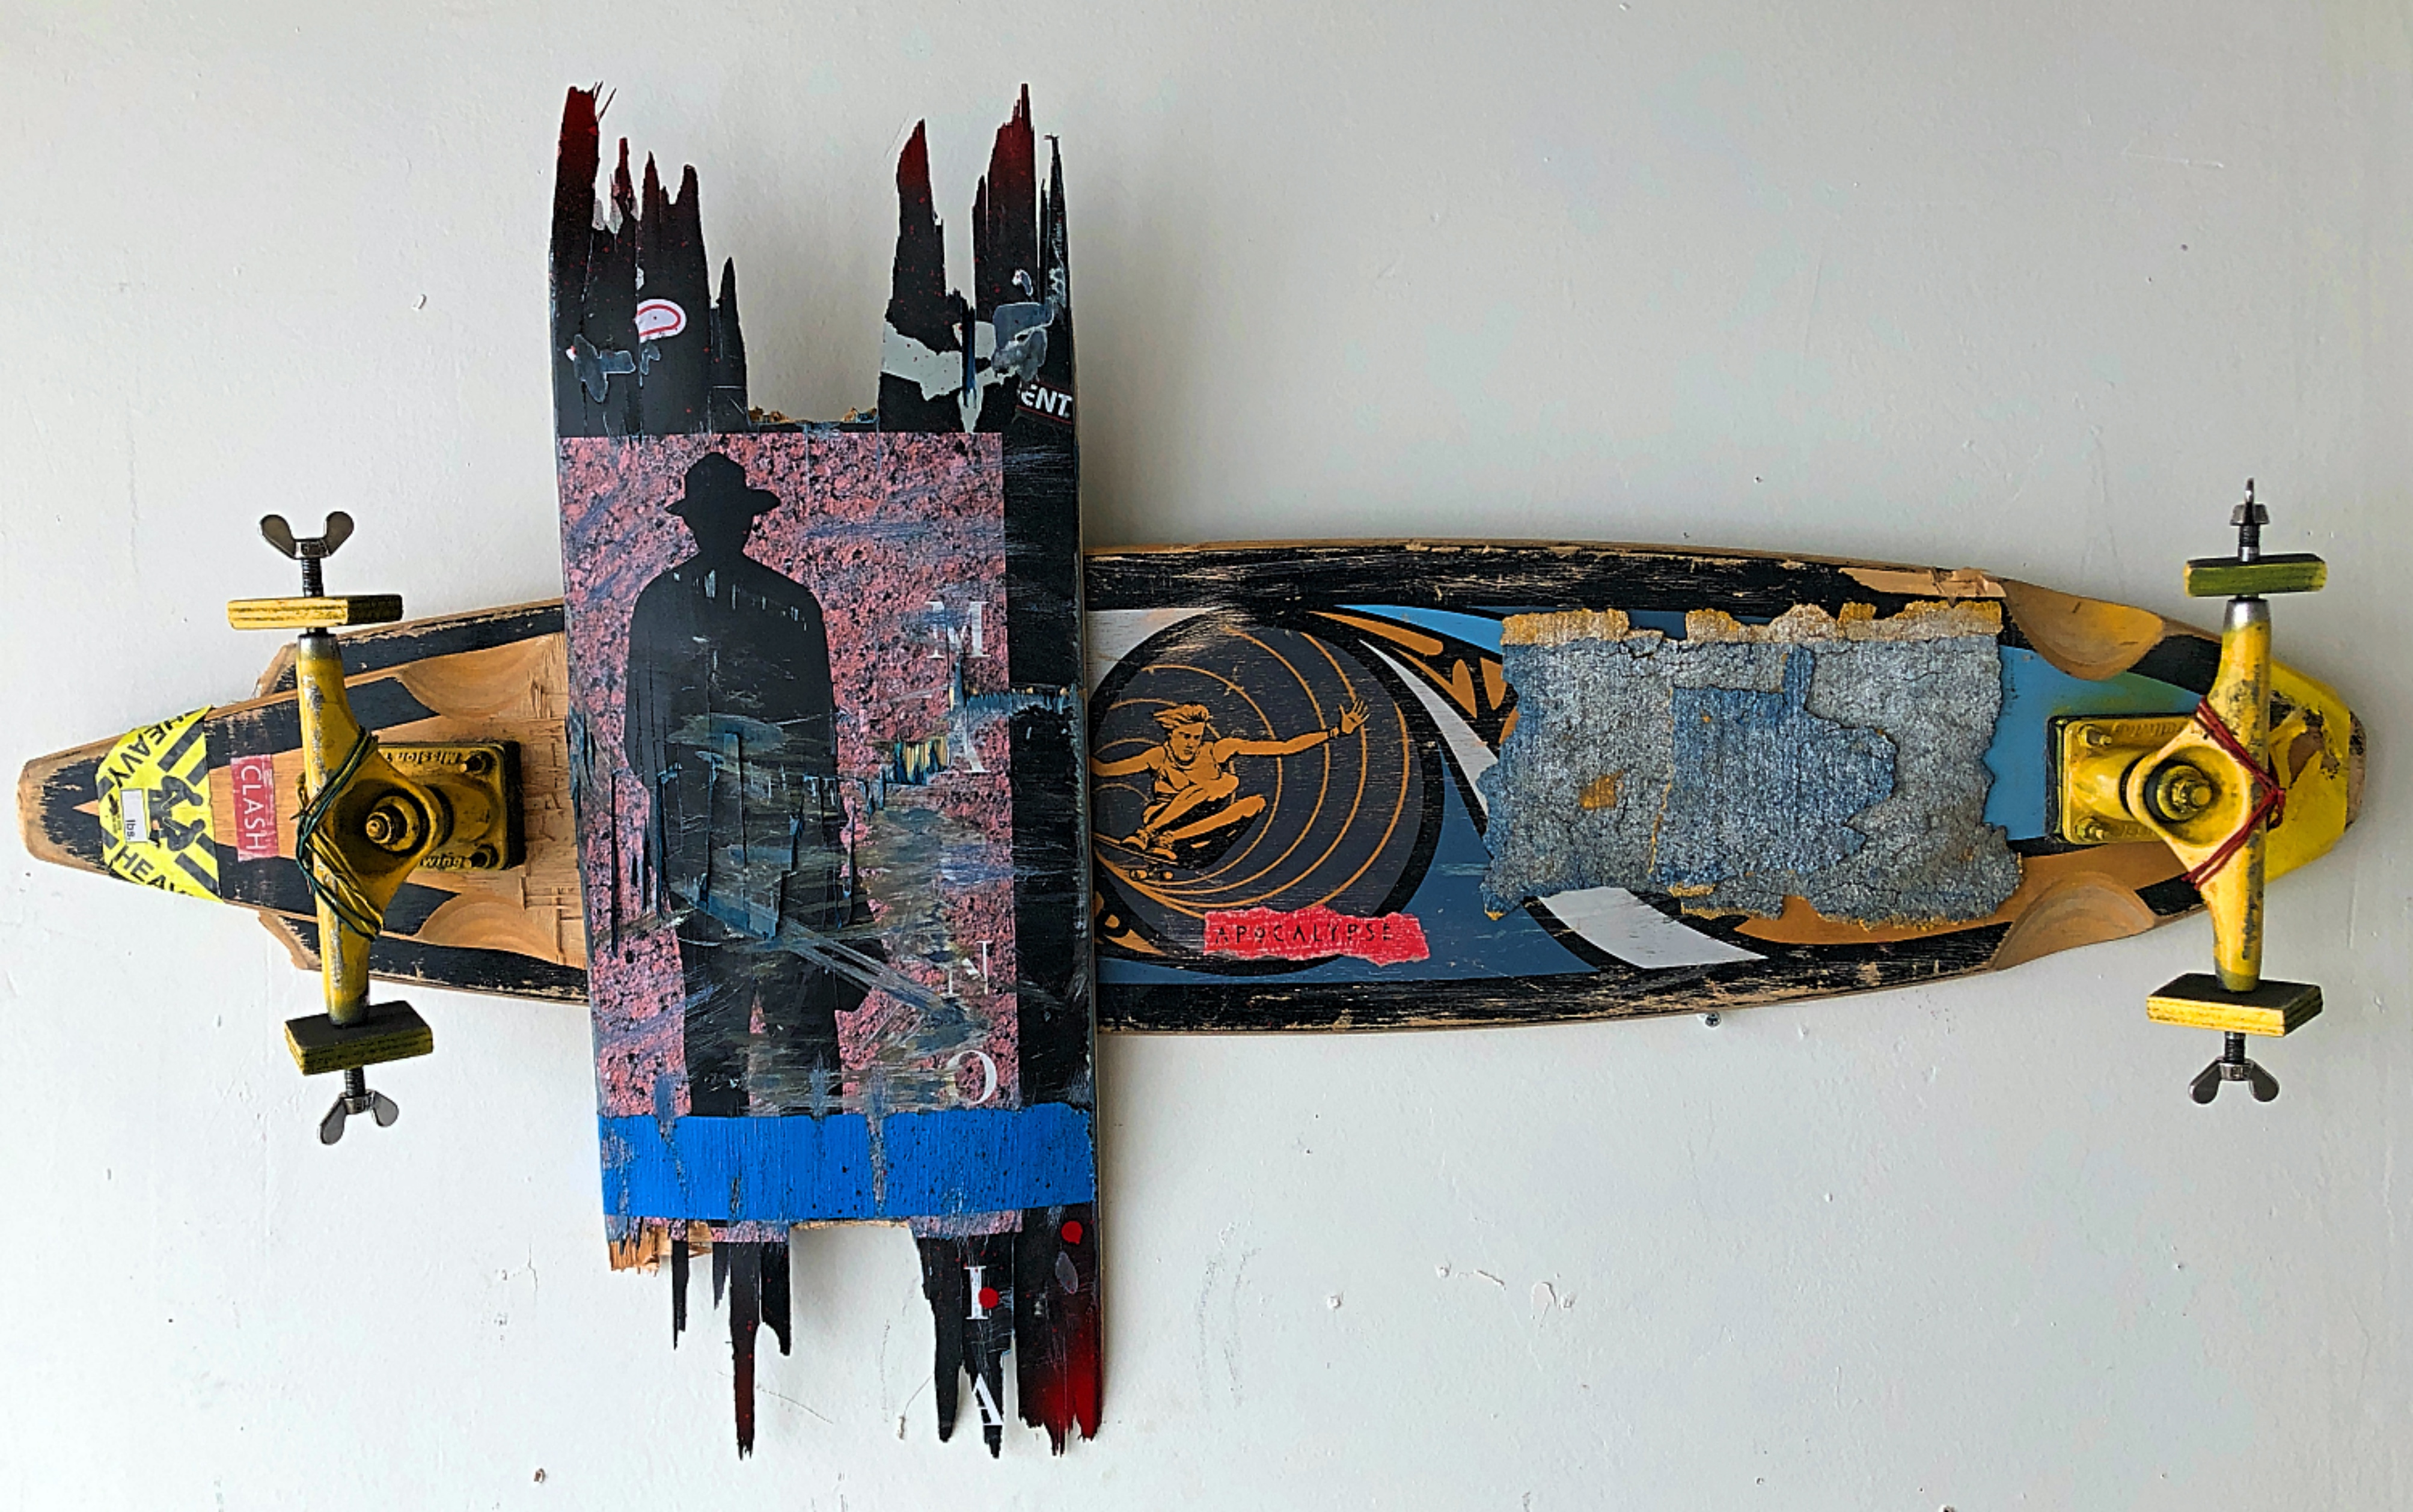 NO FREE RIDE, 2020 | Recycled skateboards, paint, tape and wood, 16” x 42” | SOLD